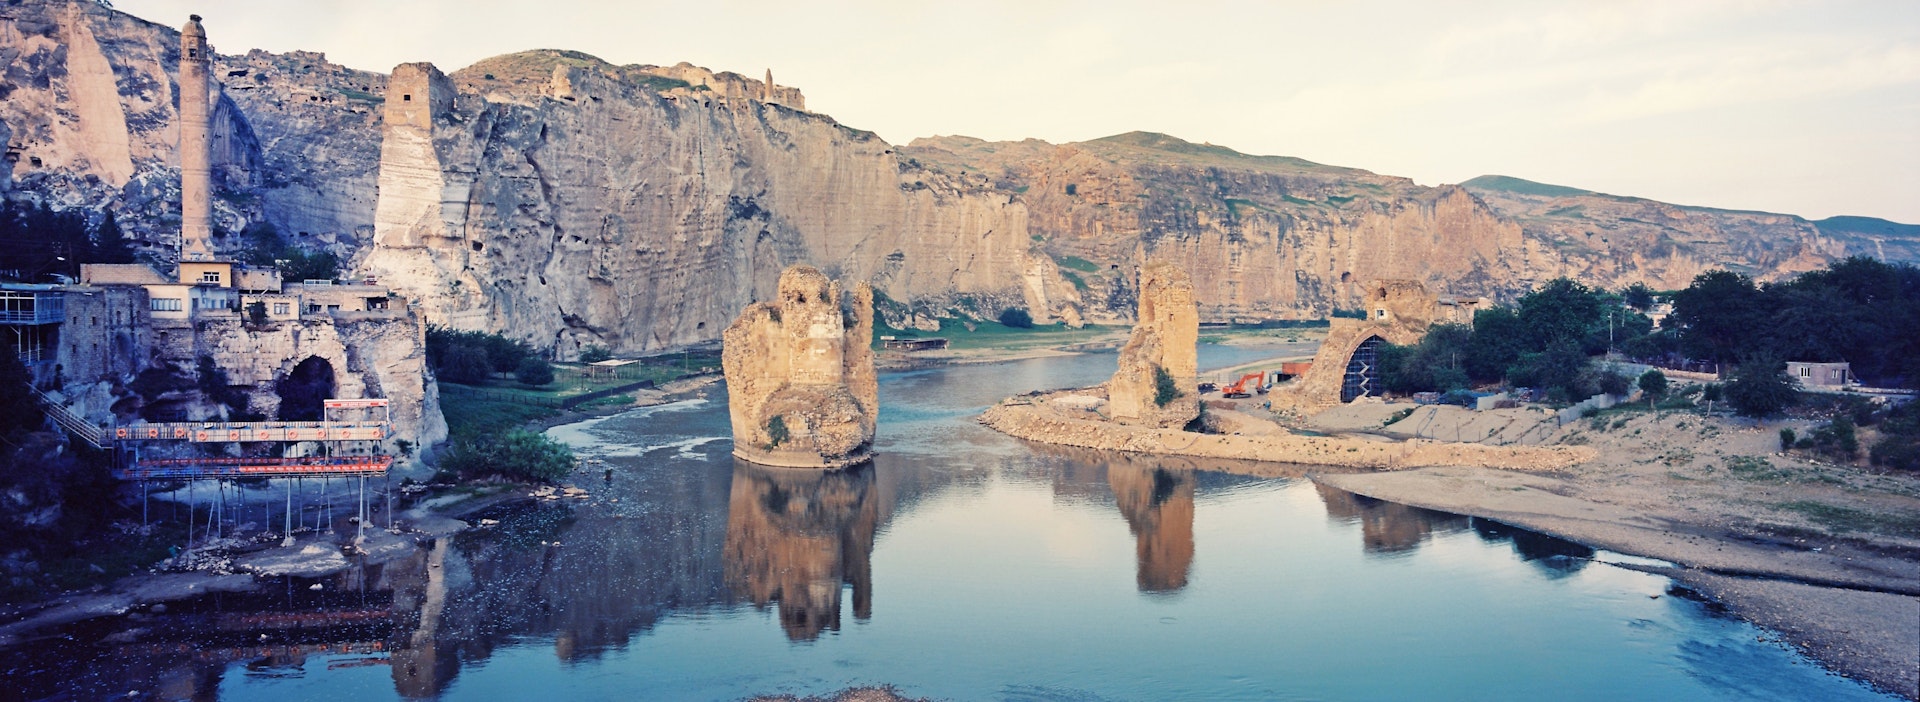 View of the town of Hasankeyf above the Tigris River. The Ilisu dam project will flood 80 per cent of its ancient monuments, along with 52 other villages and 15 small towns, by 2018. 